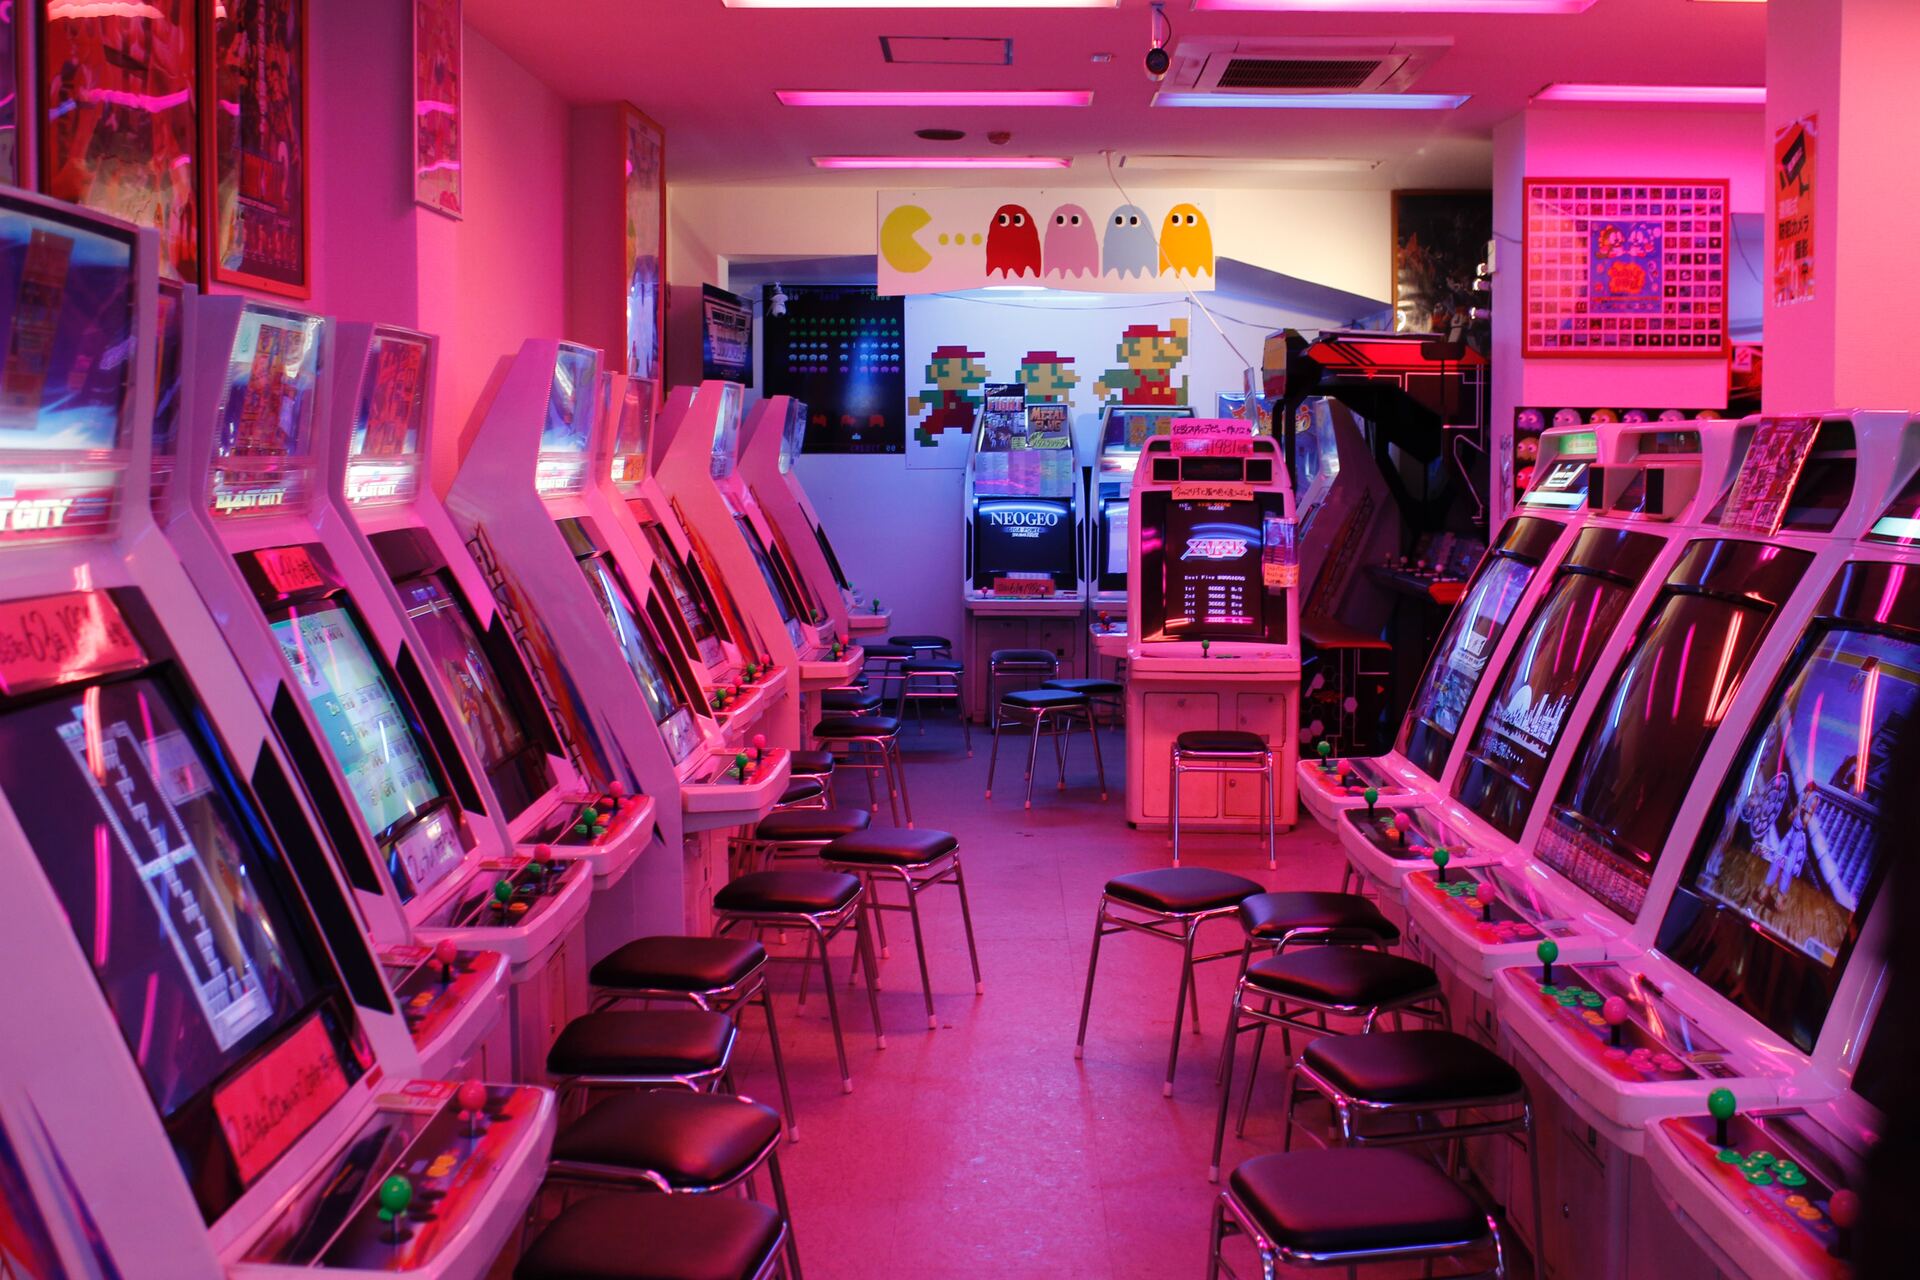 An arcade with many video game machines standing around